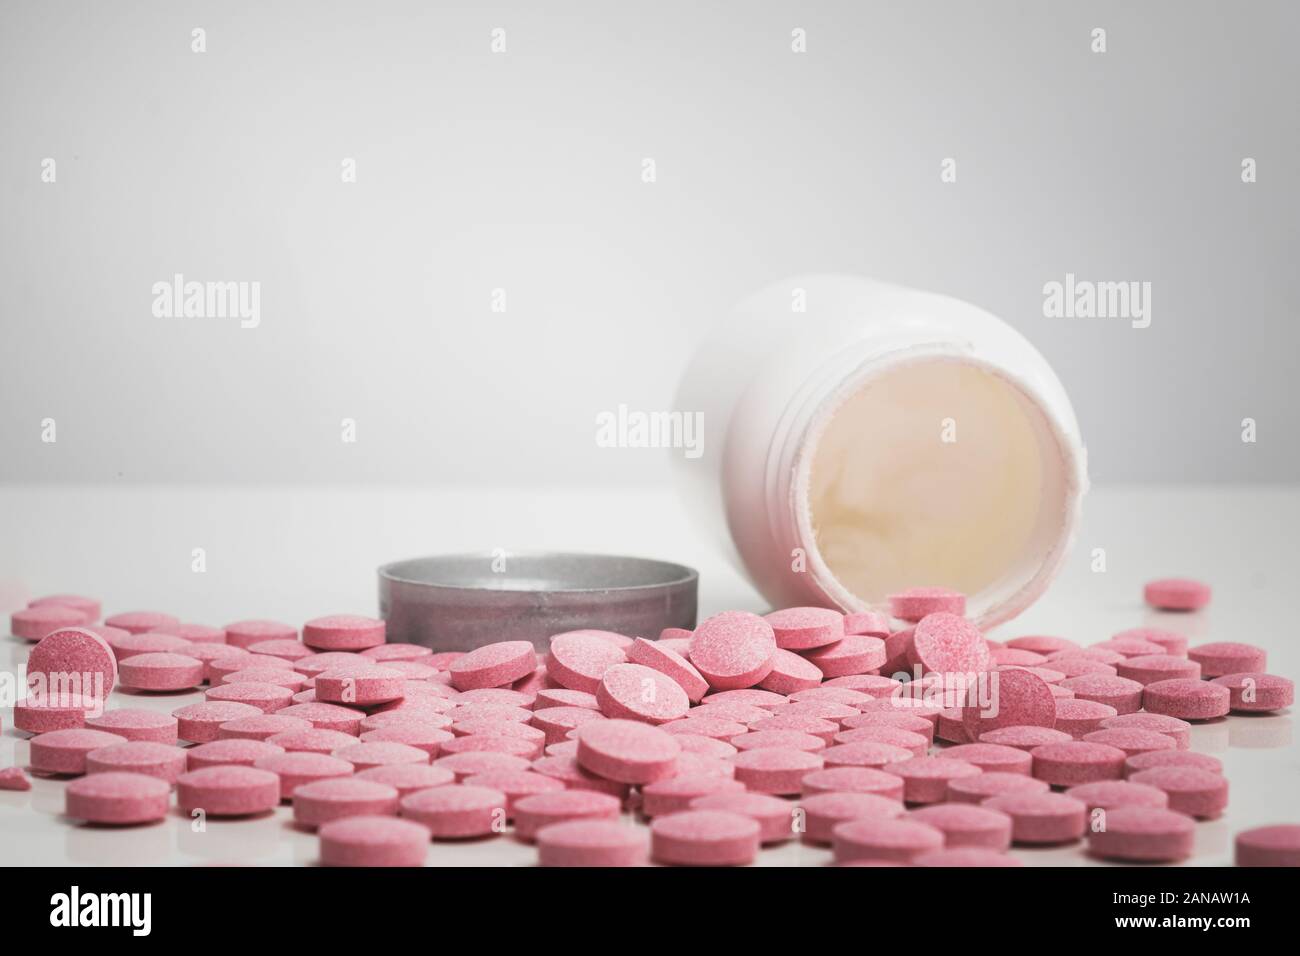 Pile of tablets in white background. Concept of prescription medicine, vitamins, nutritional supplements of drug abuse Stock Photo